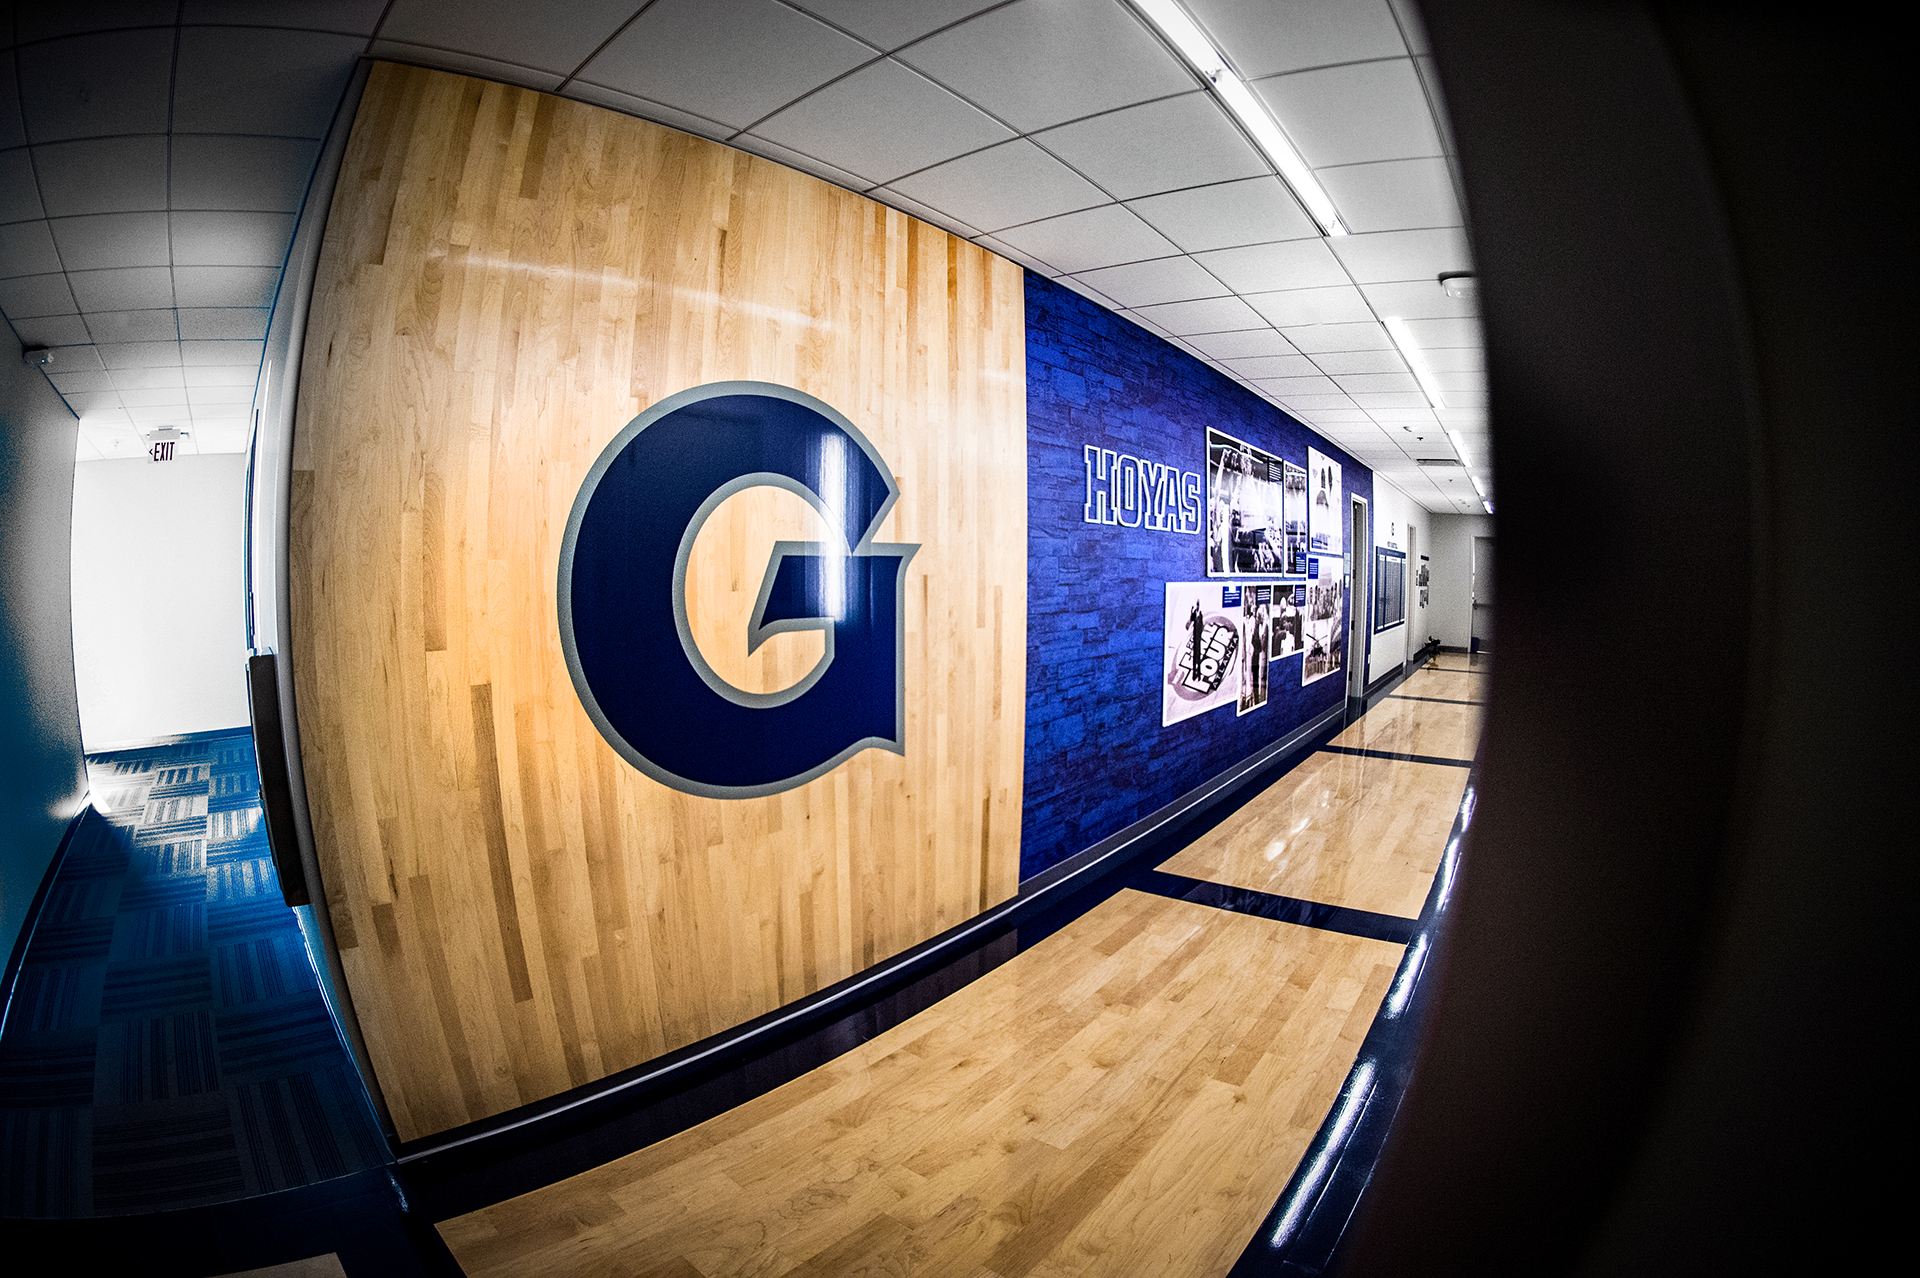 Georgetown Basketball History Project